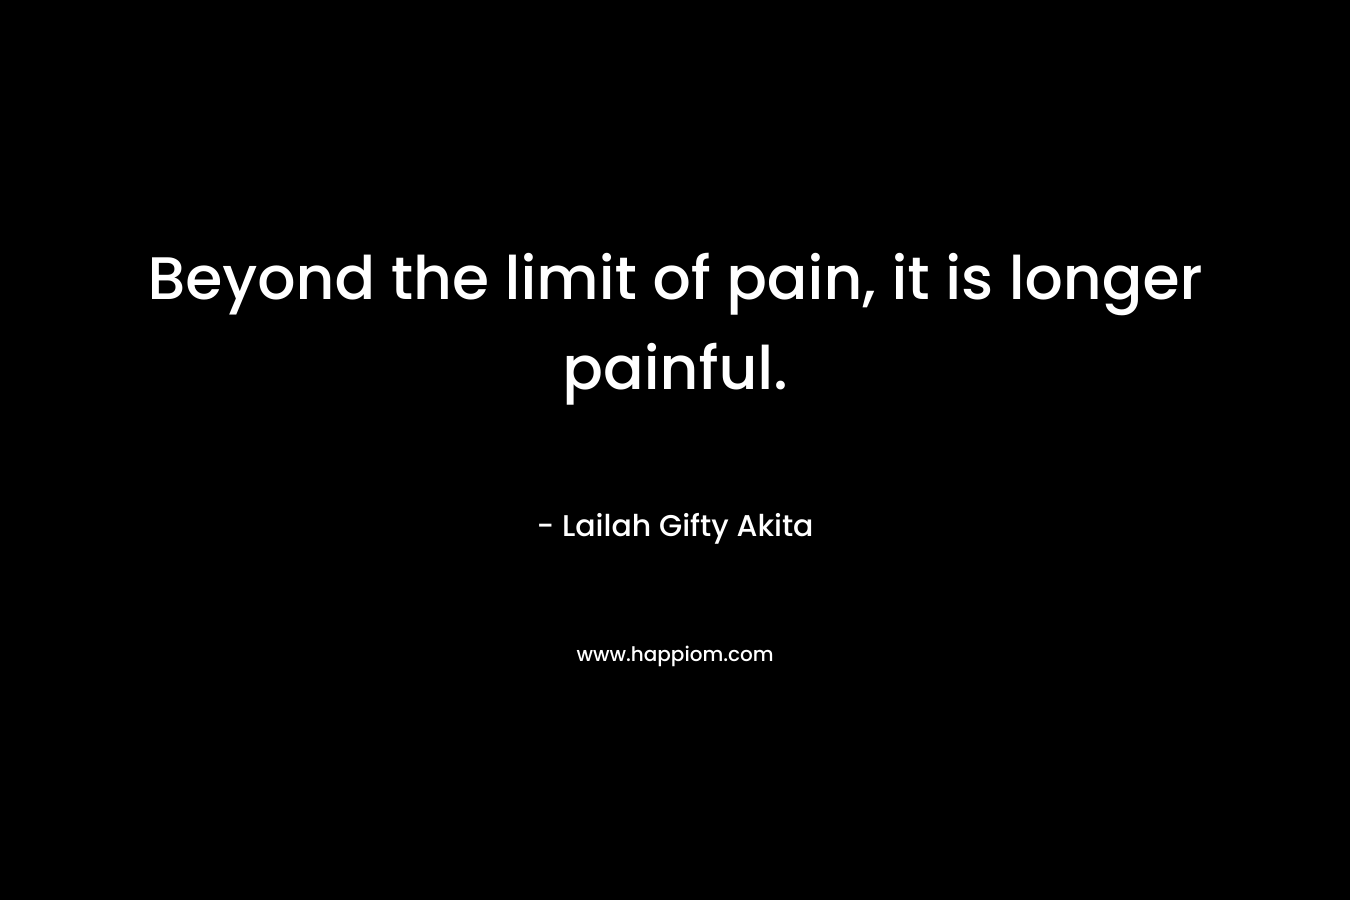 Beyond the limit of pain, it is longer painful.